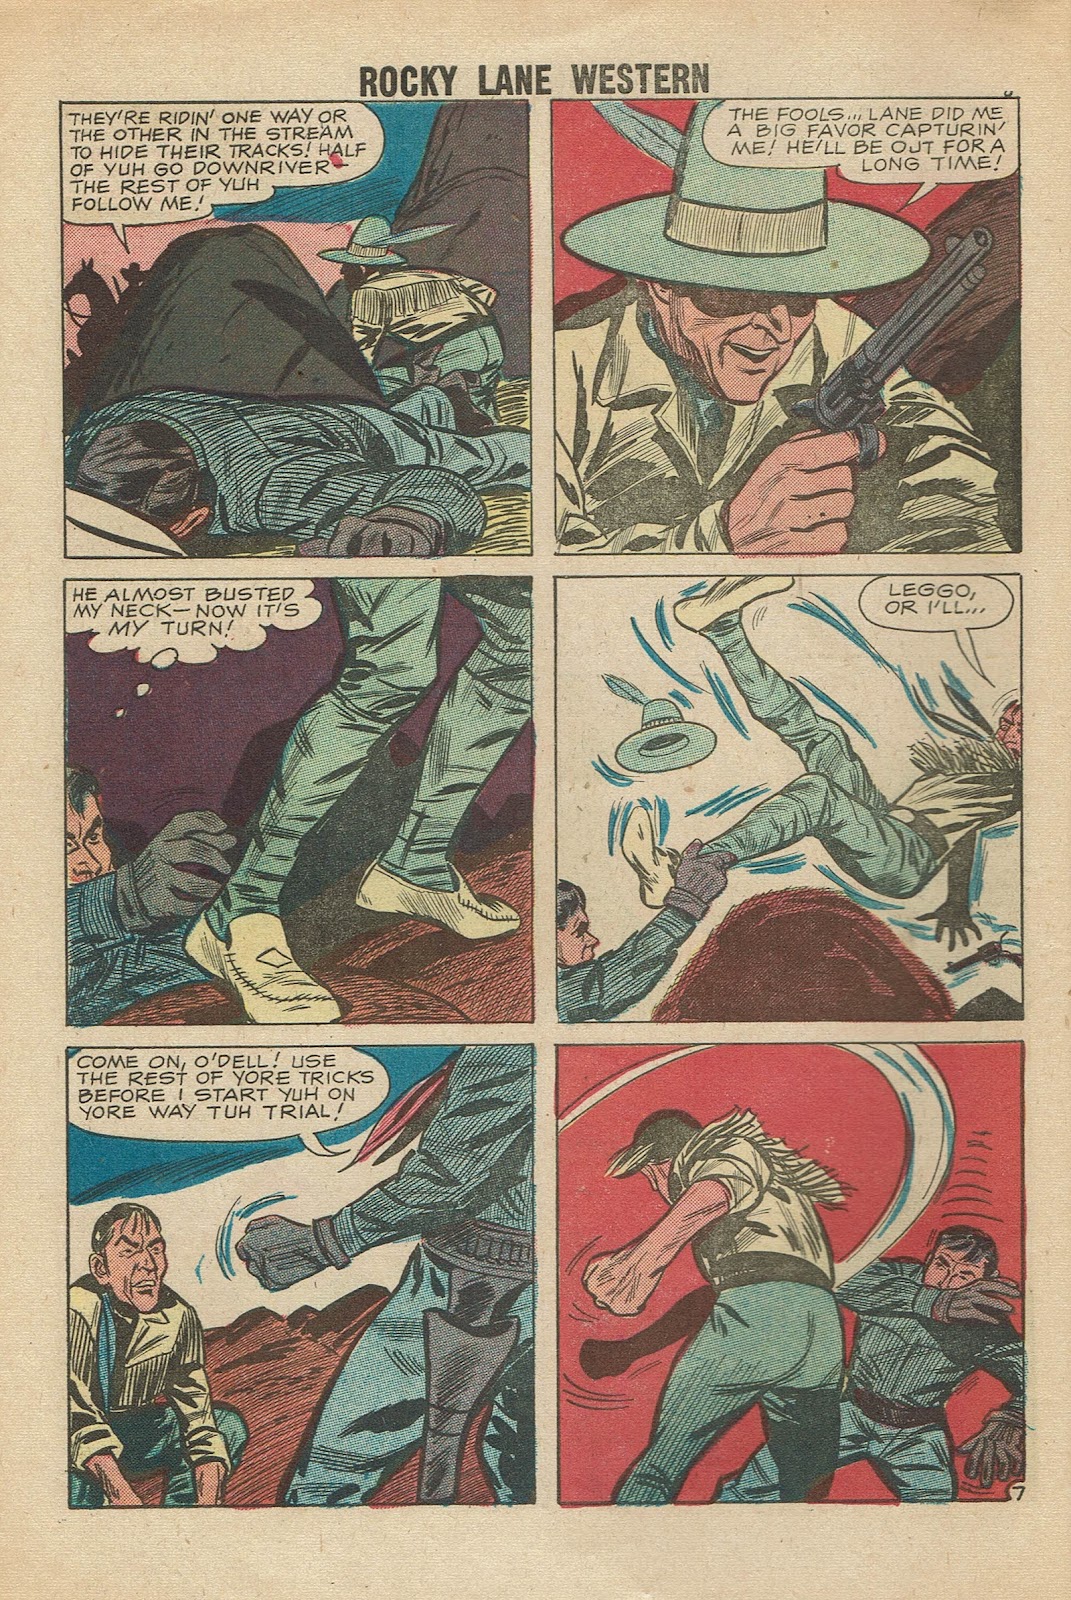 Rocky Lane Western (1954) issue 85 - Page 10